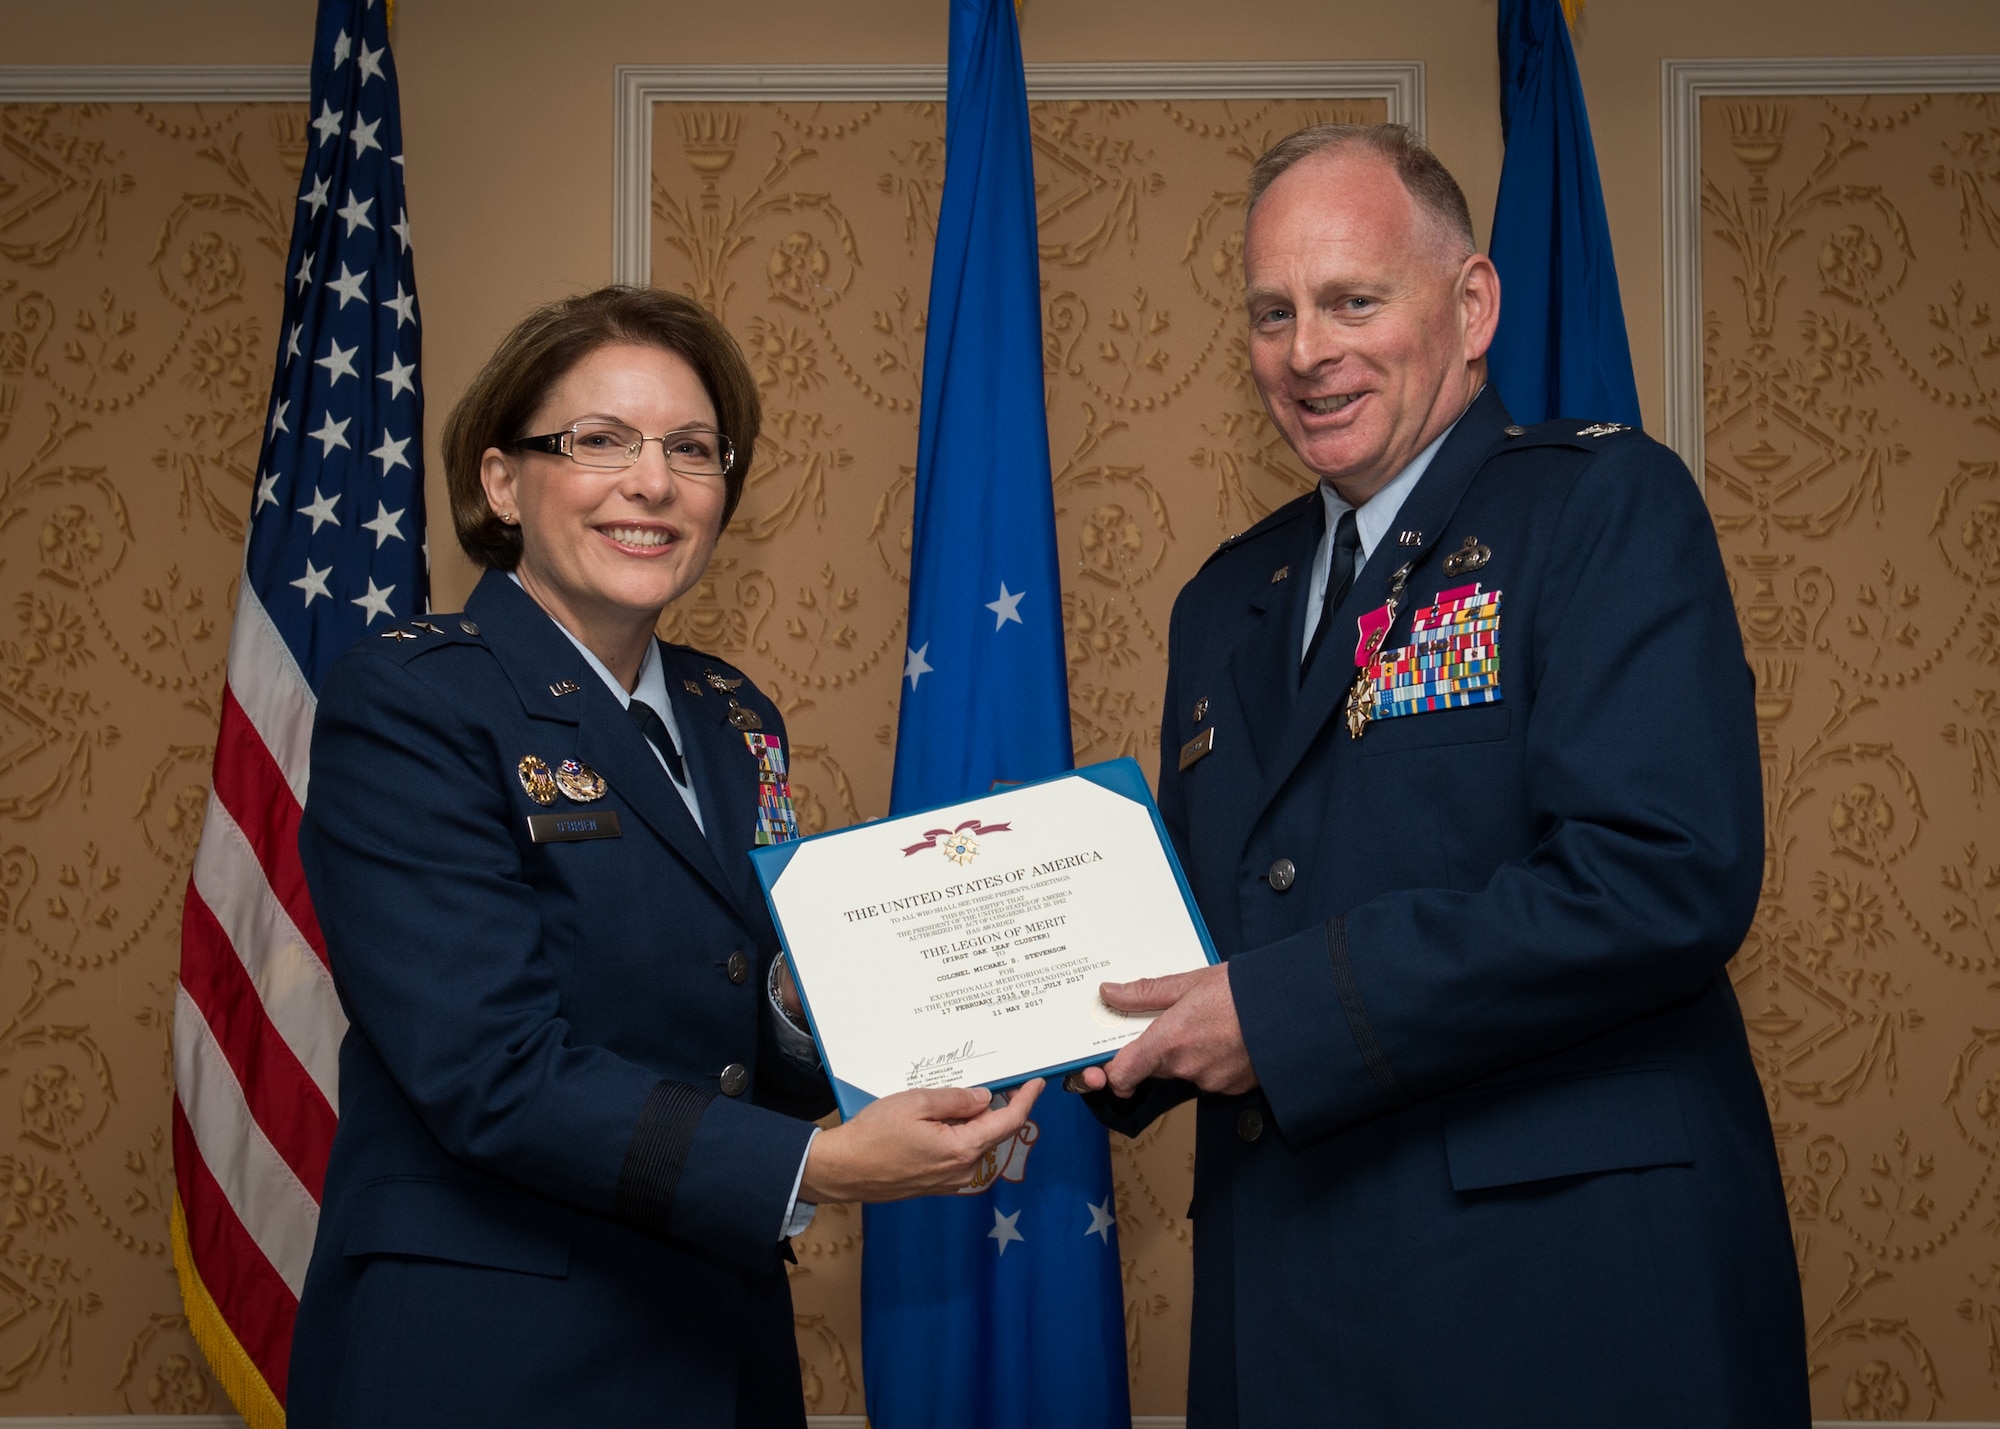 Maj. Gen. Mary F. O’Brien, commander, 25th Air Force, presents the Legion of Merit to Col. Michael Stevenson, outgoing commander, during the 363rd Intelligence, Surveillance and Reconnaissance Wing change of command ceremony July 7, 2017.  (U.S. Air Force Photo by Staff Sgt. Areca Bell)